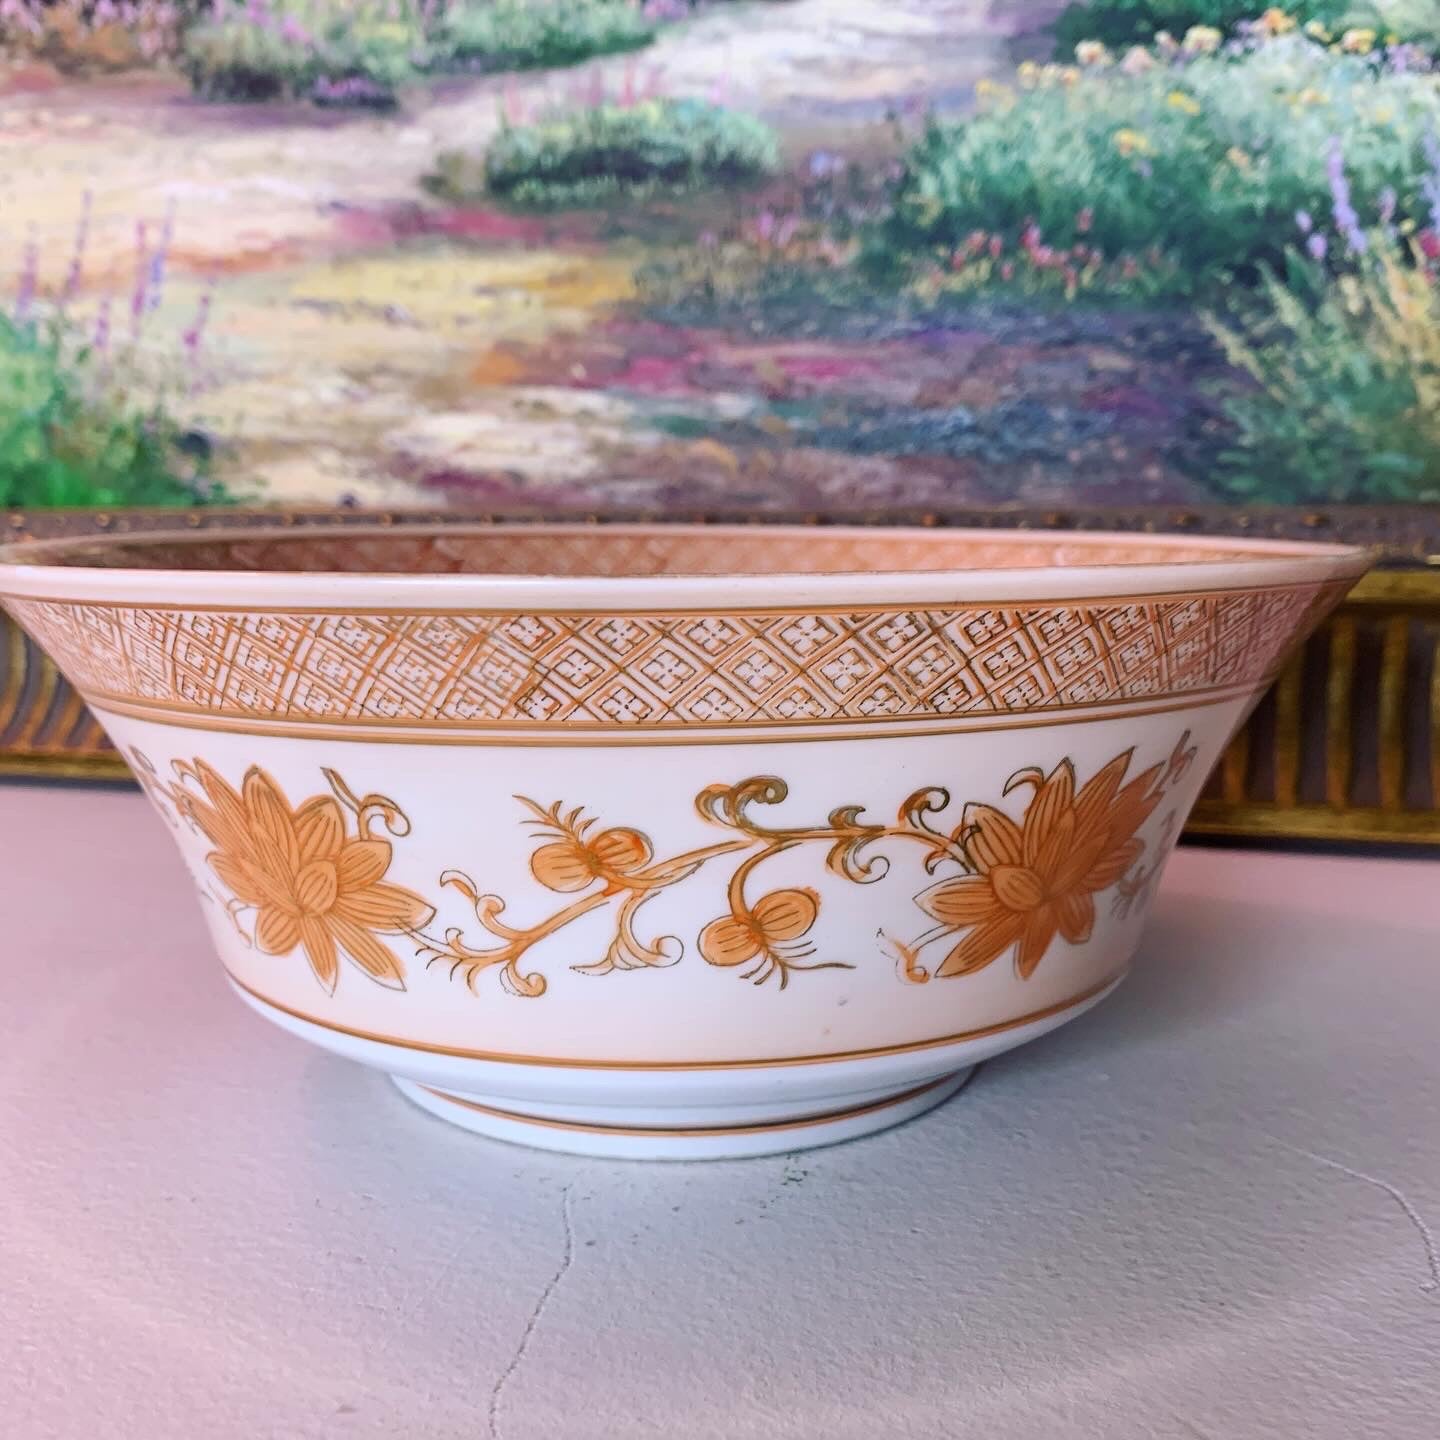 Andrea by Sadek bowl with floral details and swan! Excellent condition!